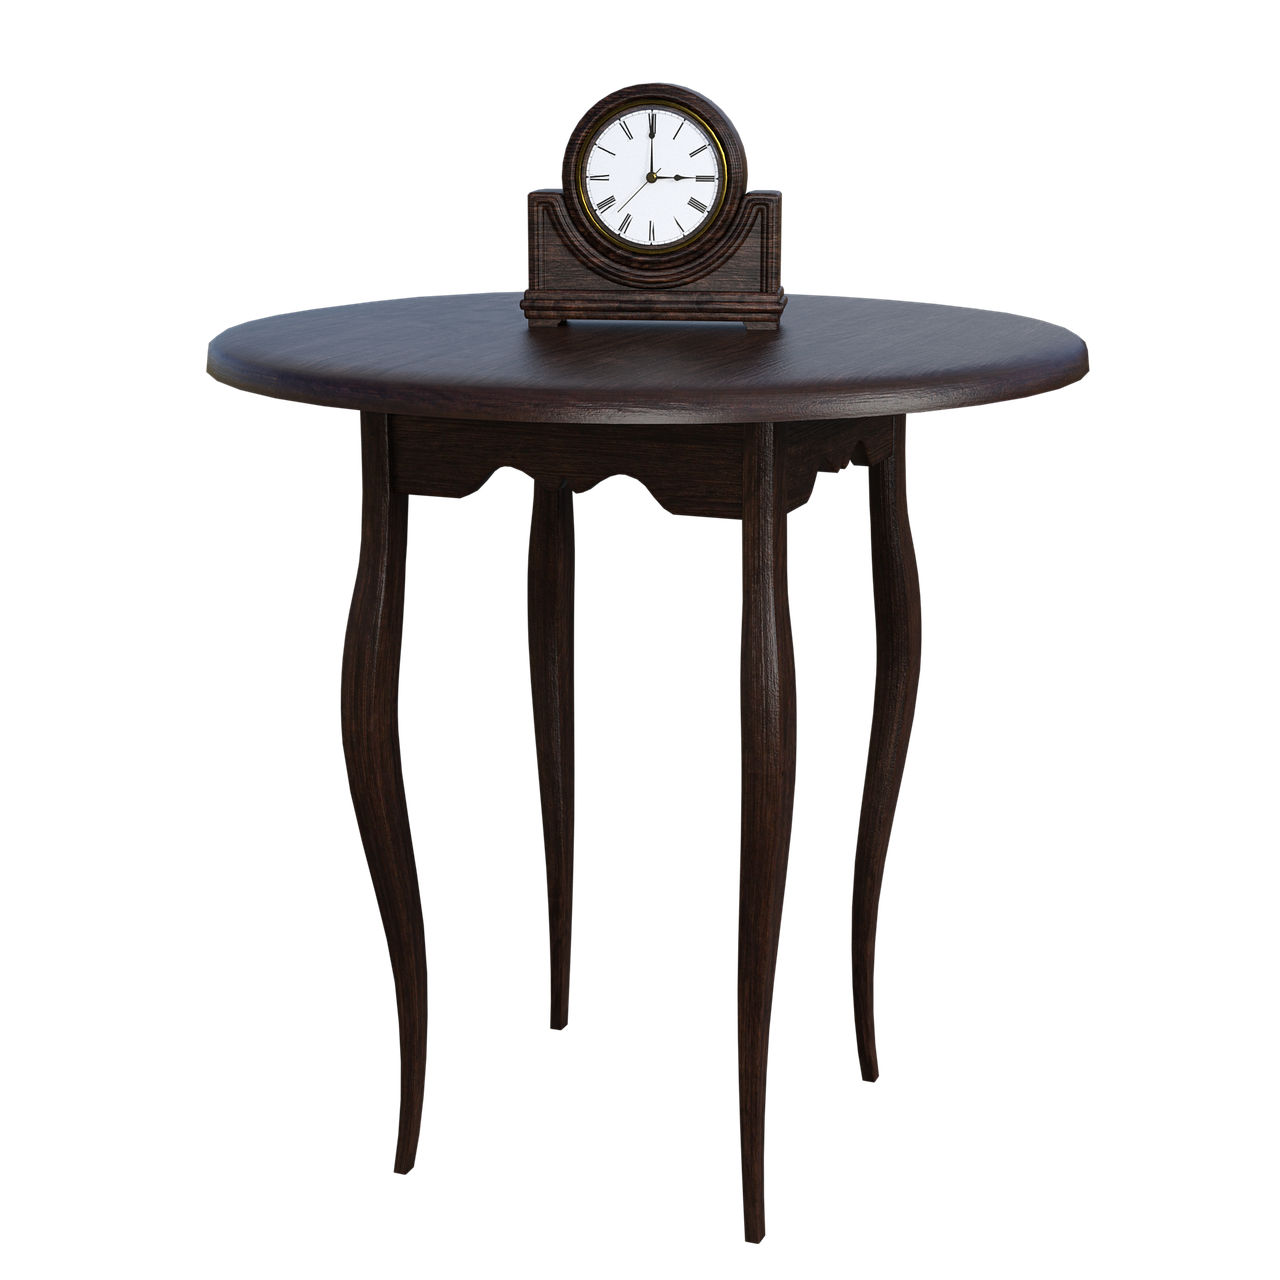 table clock time free photo